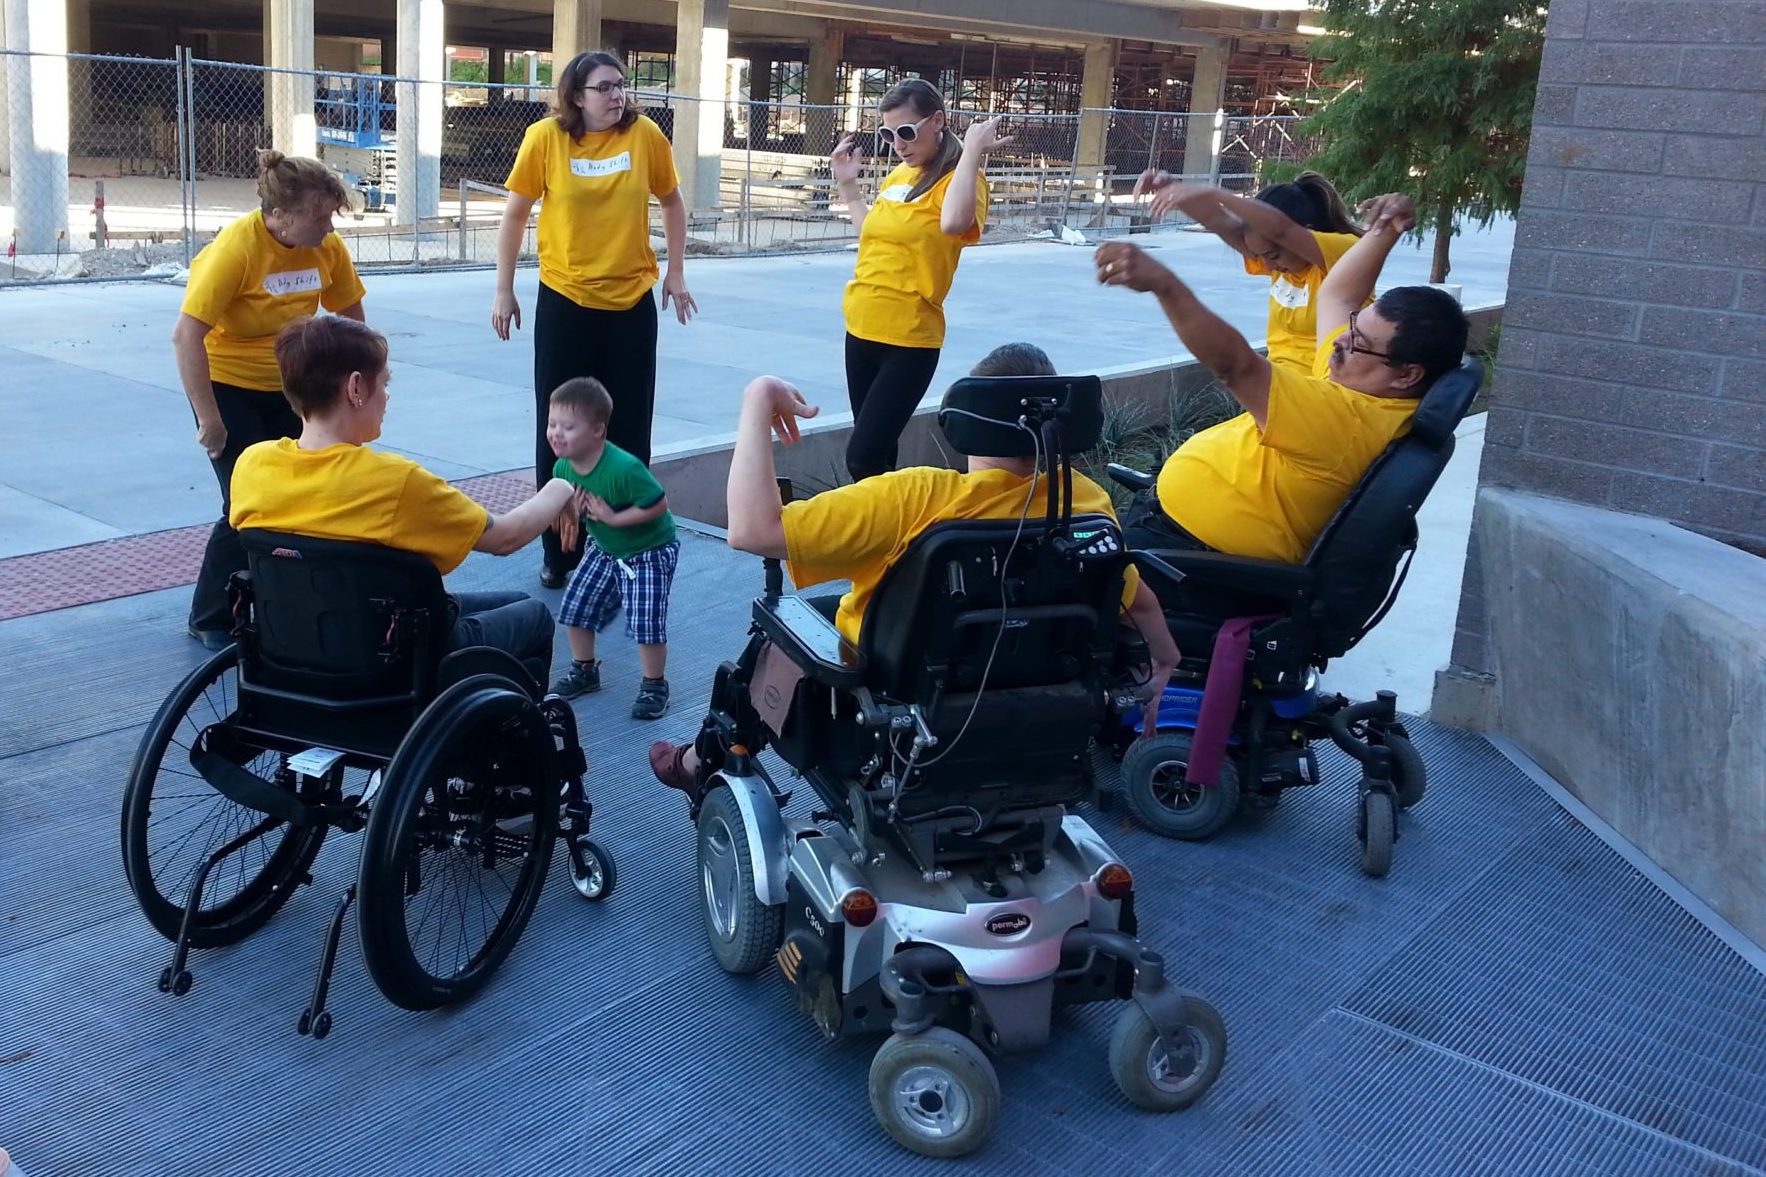 Six performers with and without disabilities form a circle and dance. A little boy dances in the center.